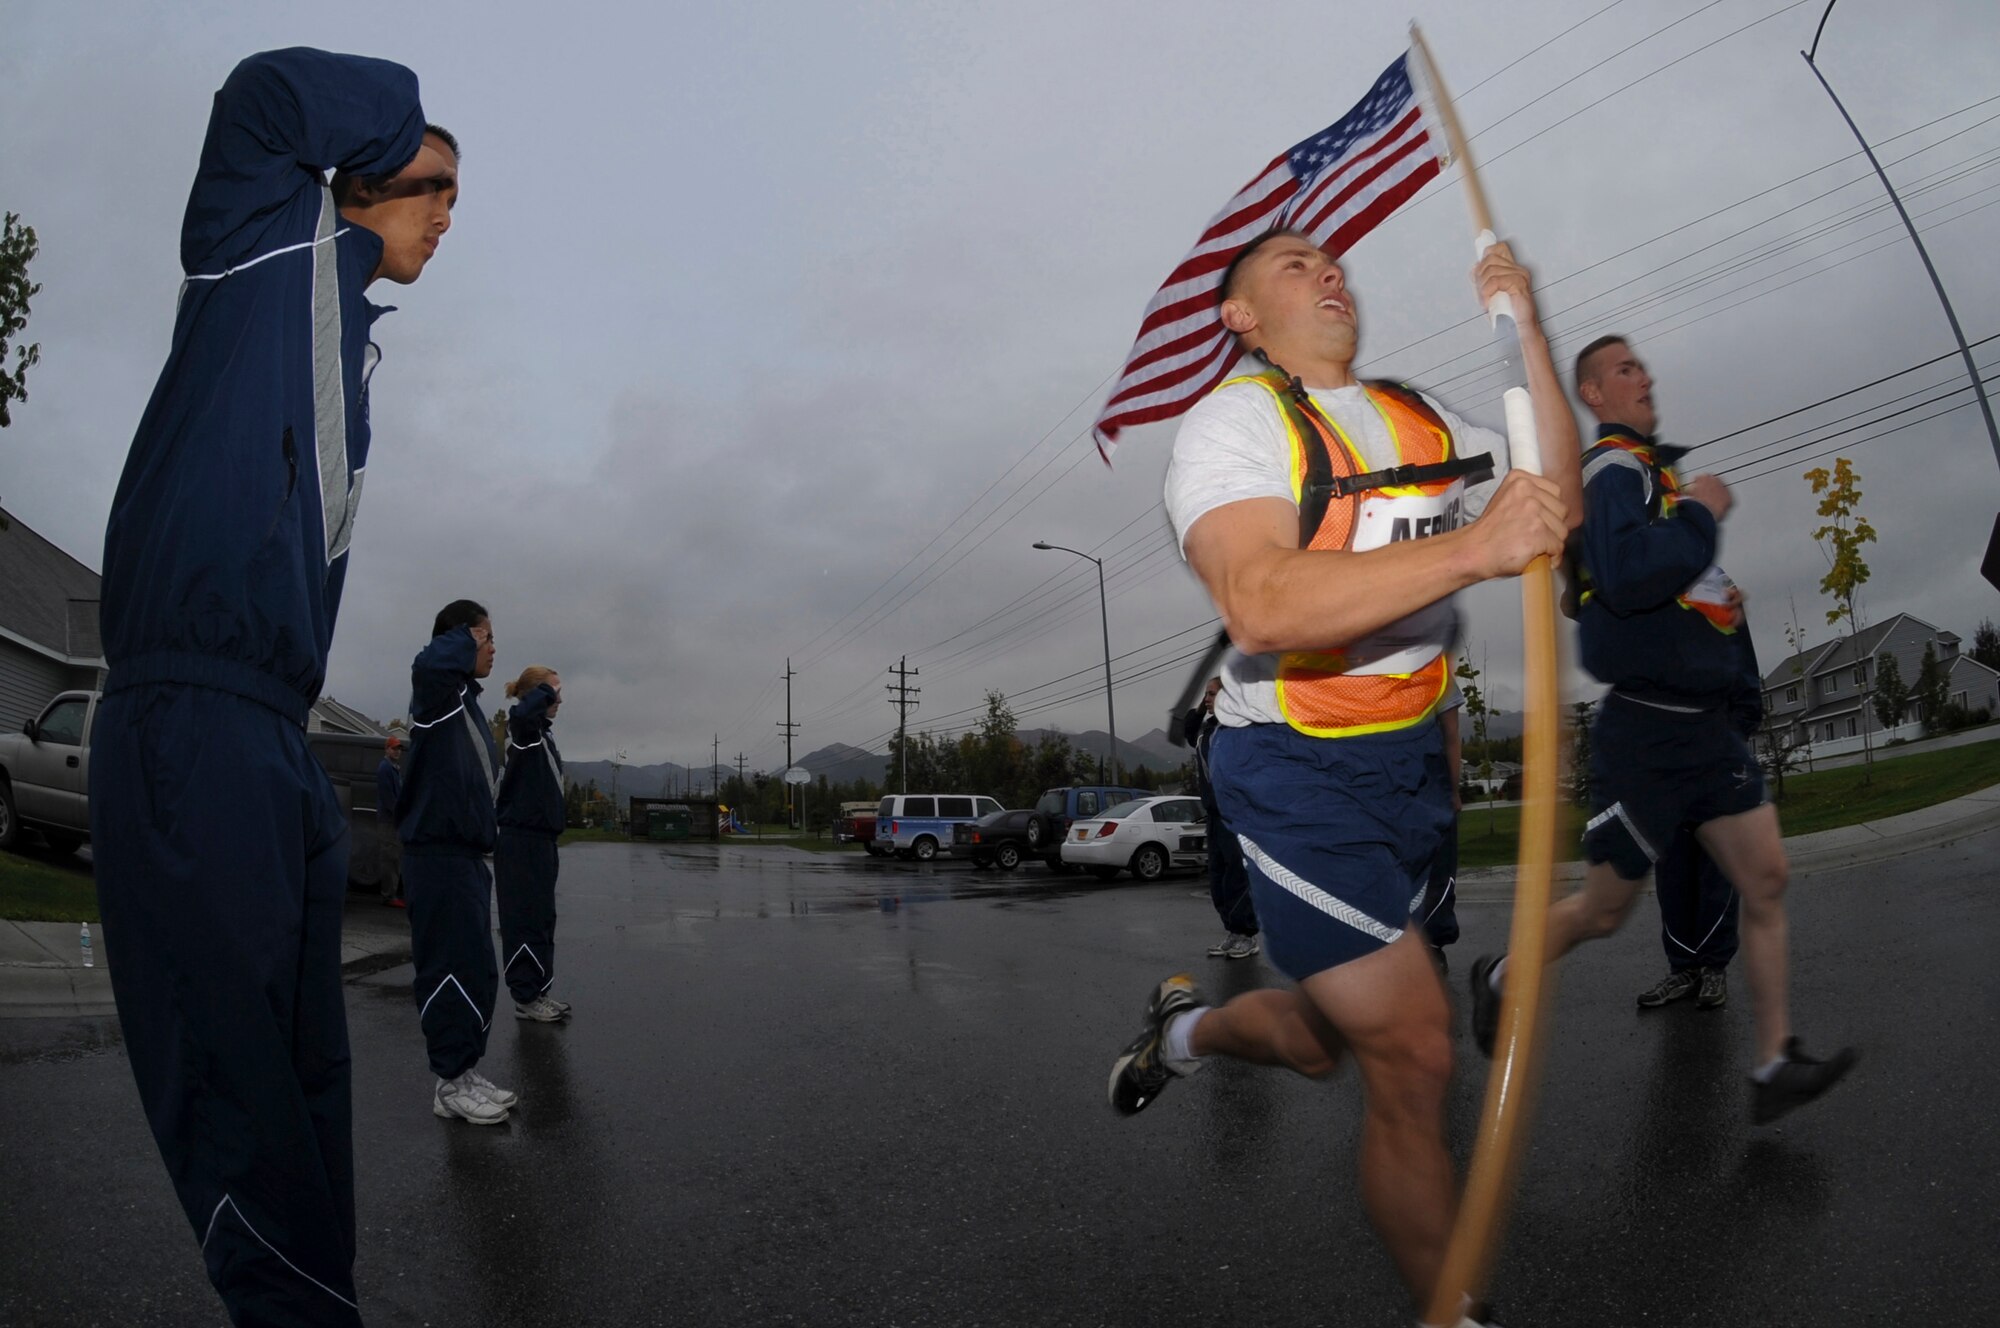 ELMENDORF AIR FORCE BASE, Alaska -- Air Force Cadets from the University of Alaska Anchorage kick off their 9-11 run at the Silver Run Community Center Sept. 12. The run was organized to show support of the Armed Forces fighting terrorism and in remembrance 9-11. The run lasted 24 hours with nearly 100 runners taking shifts of 30 minutes. (U.S. Air Force photo/Senior Airman Matthew Owens)